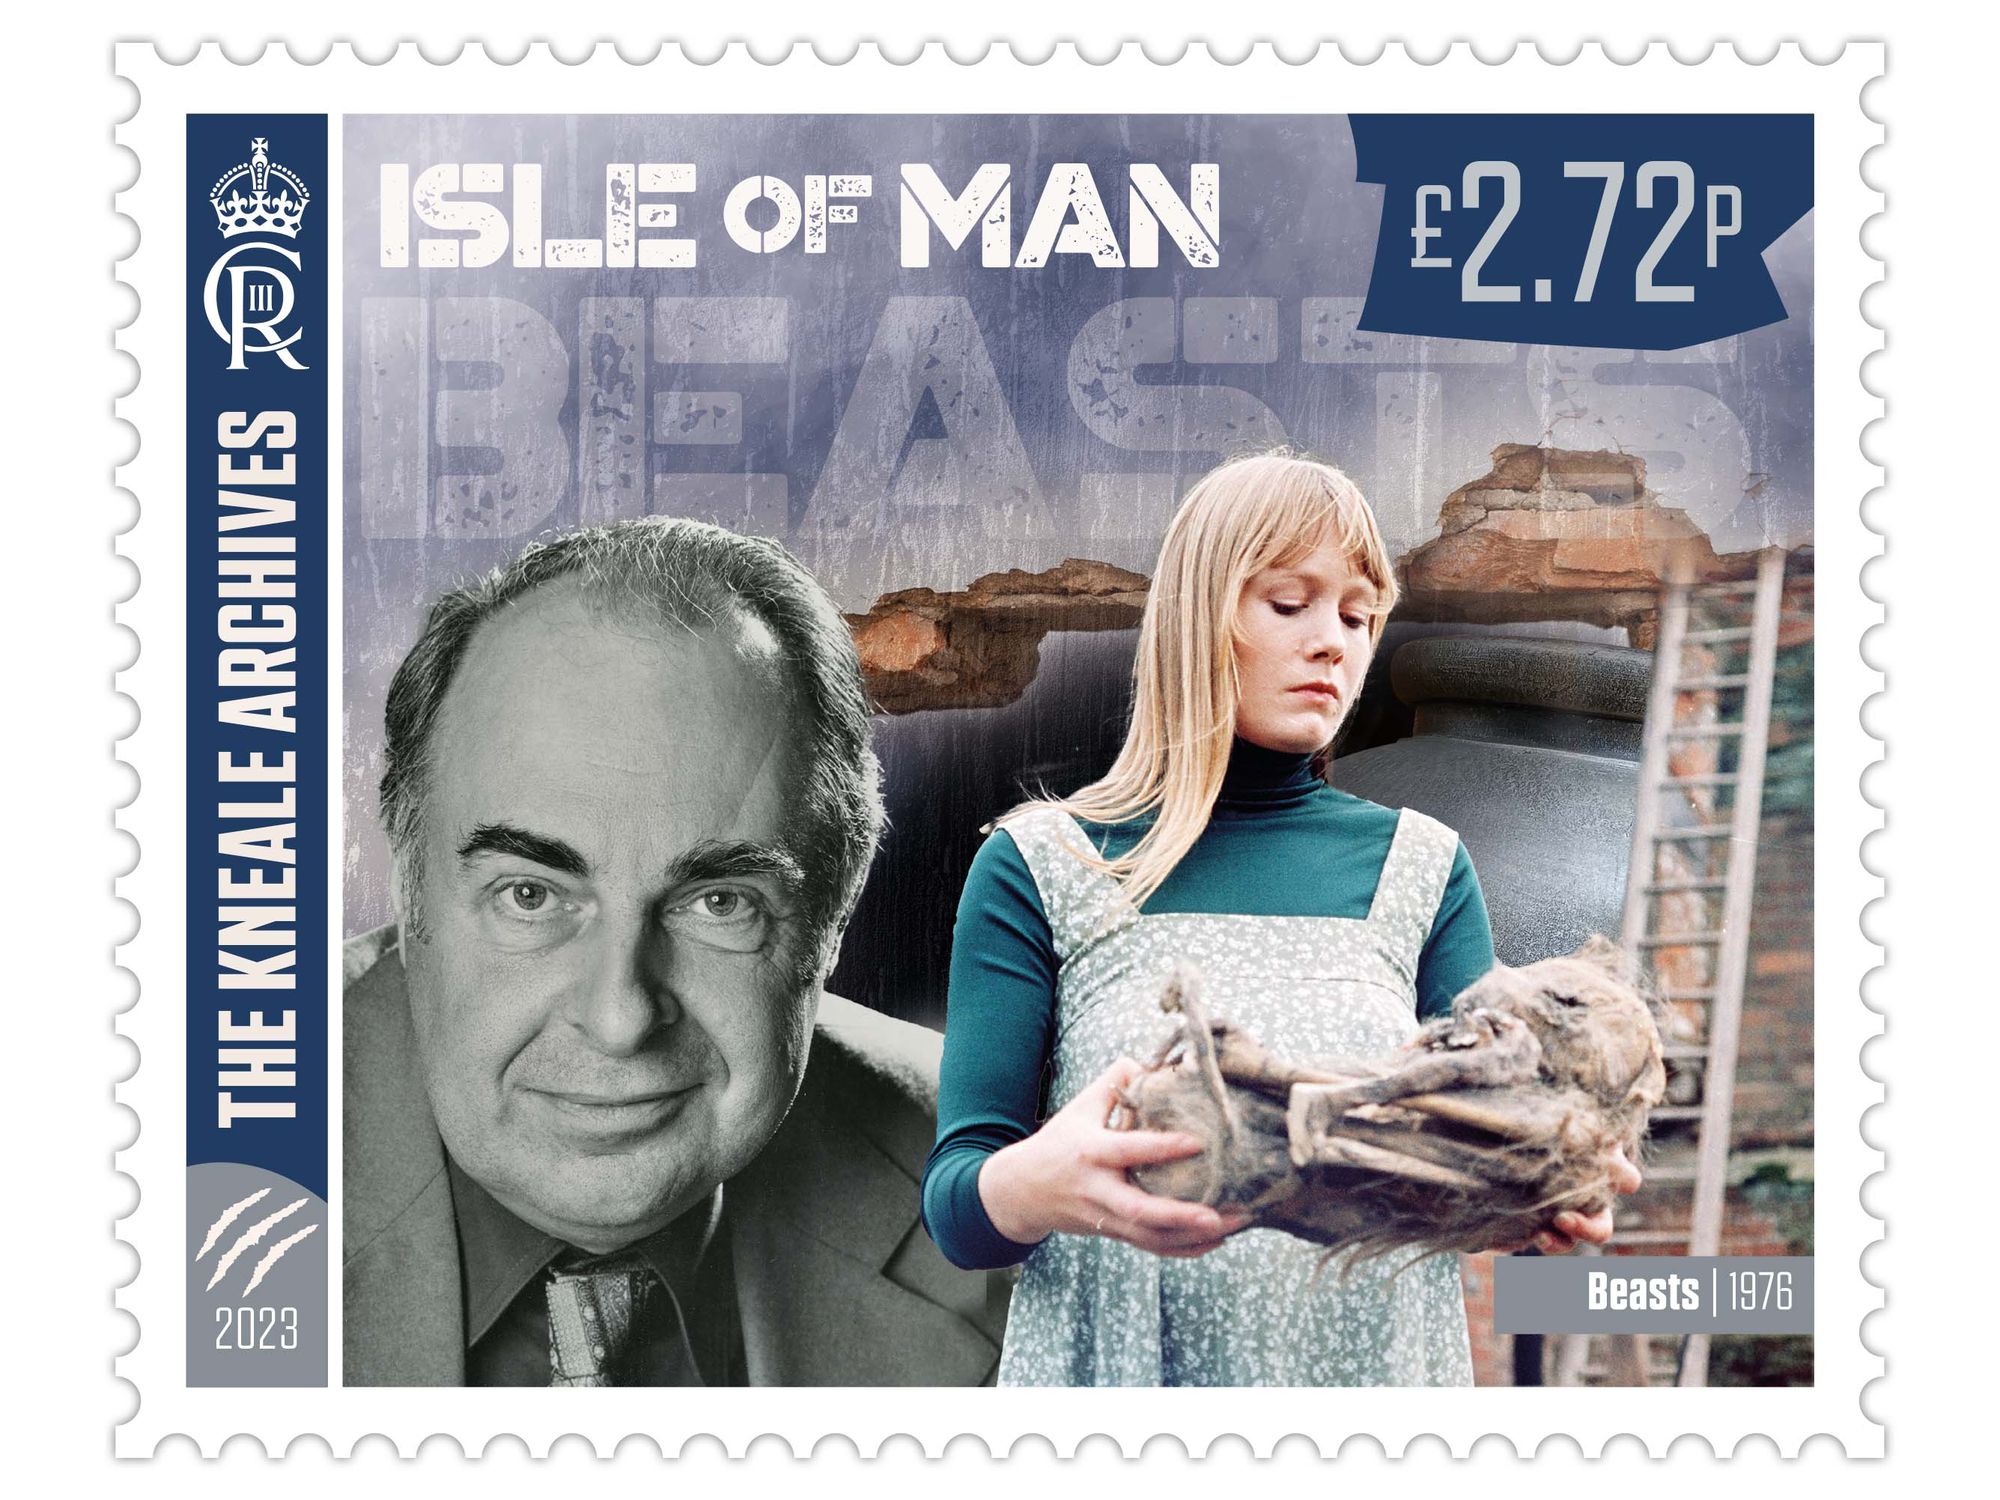 Quatermass Creator Nigel Kneale Commemorated in Postage Stamps